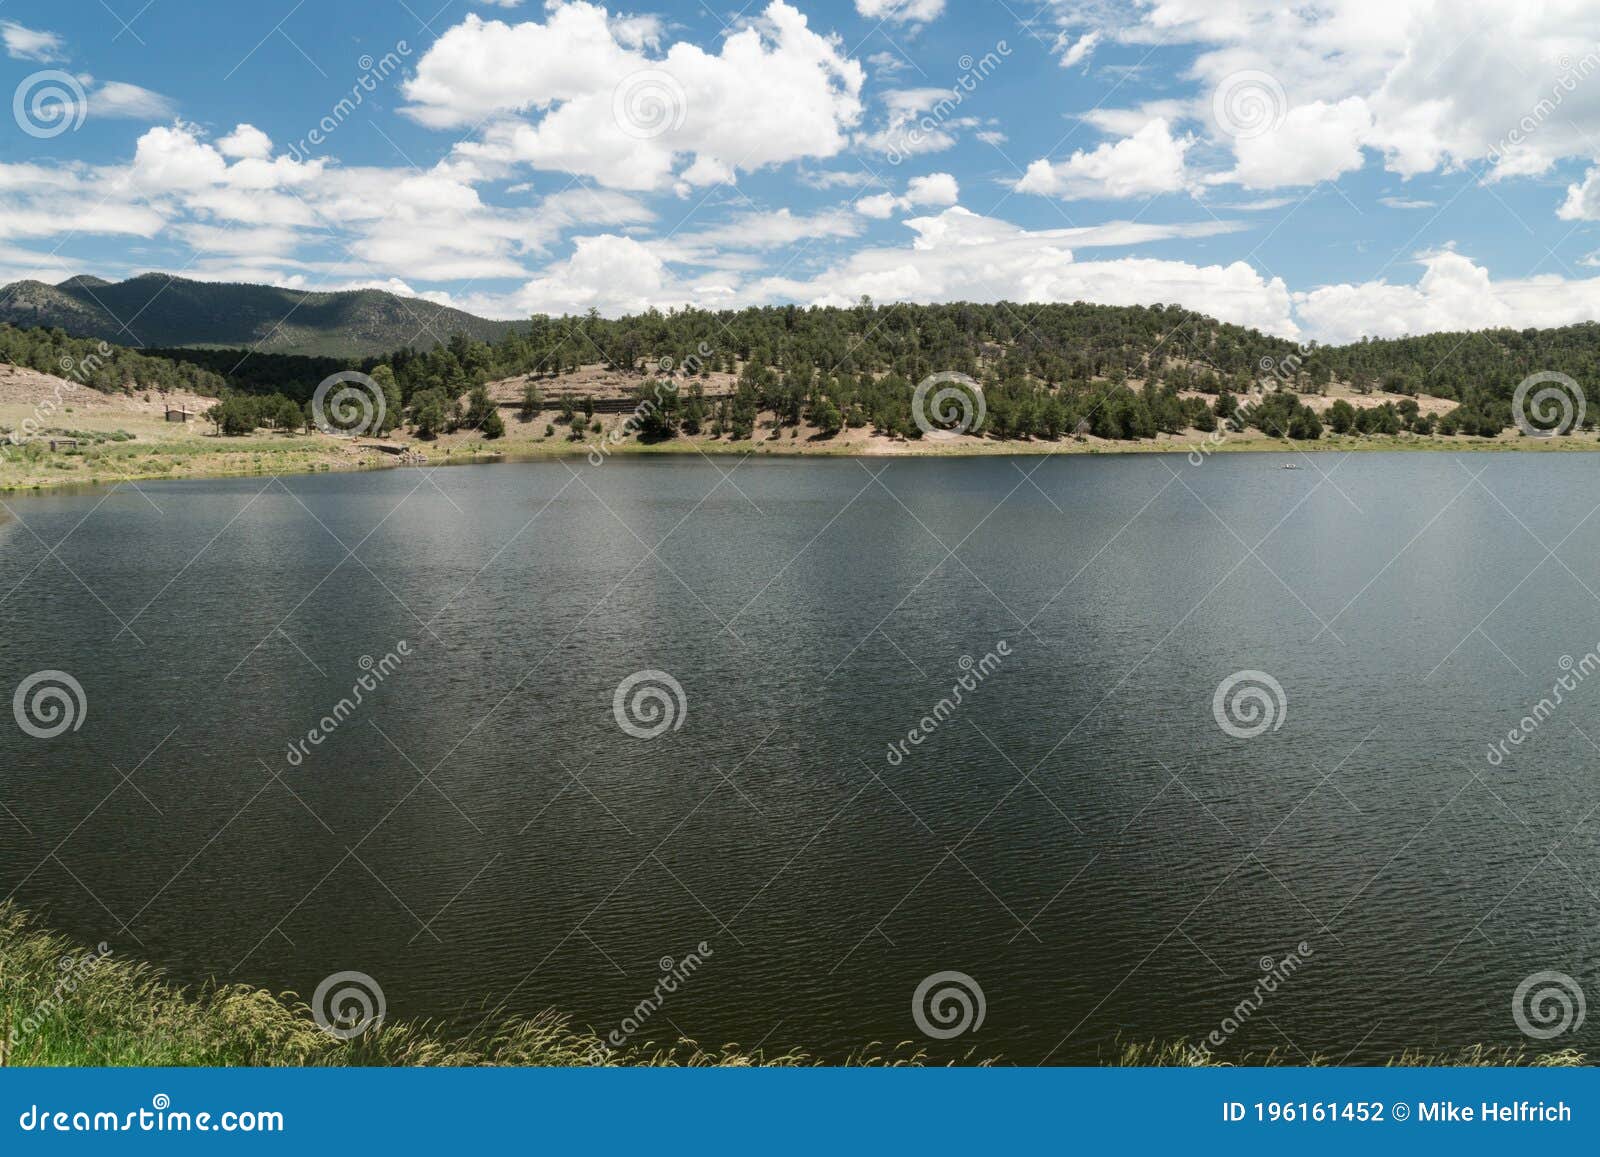 deep blue water at quemado lake in new mexico.